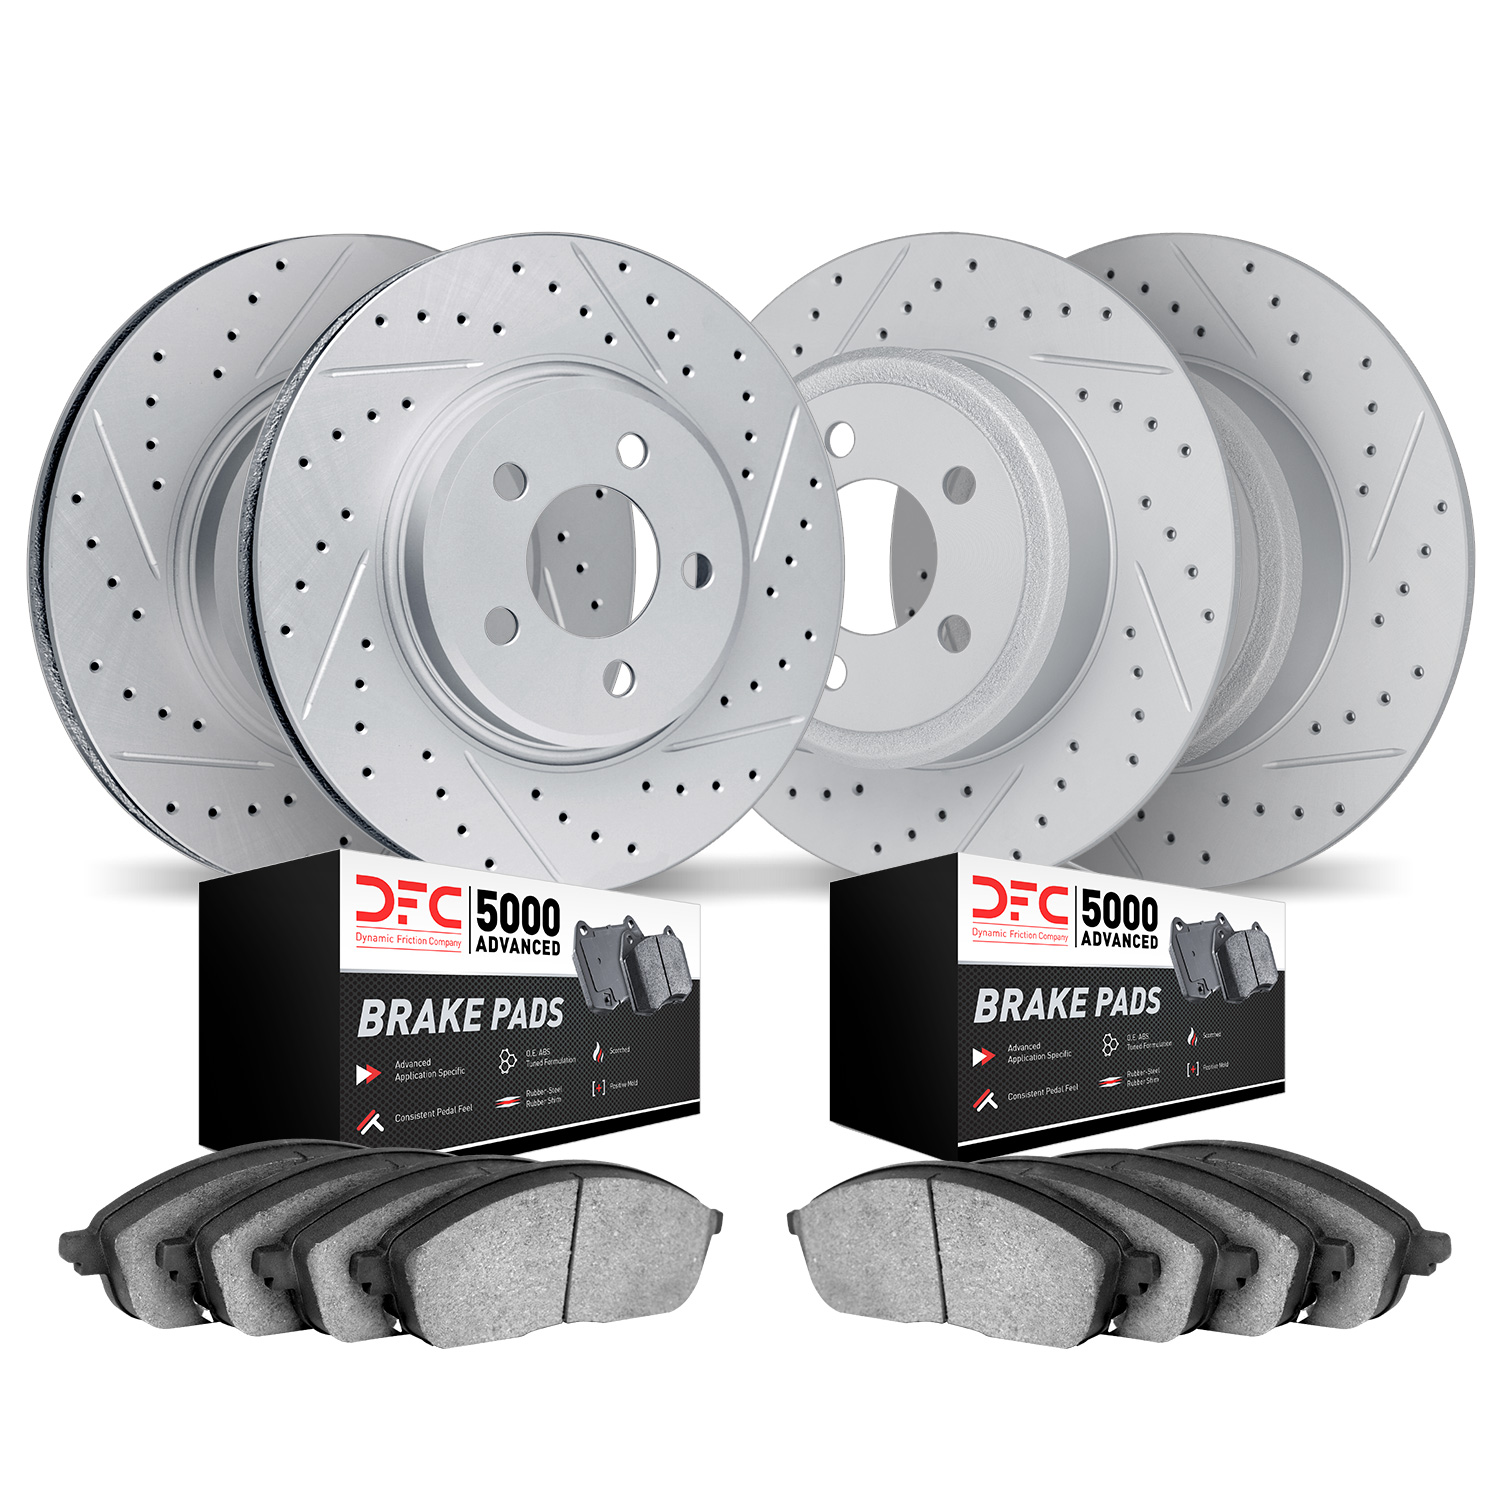 2504-11014 Geoperformance Drilled/Slotted Rotors w/5000 Advanced Brake Pads Kit, 2015-2019 Multiple Makes/Models, Position: Fron